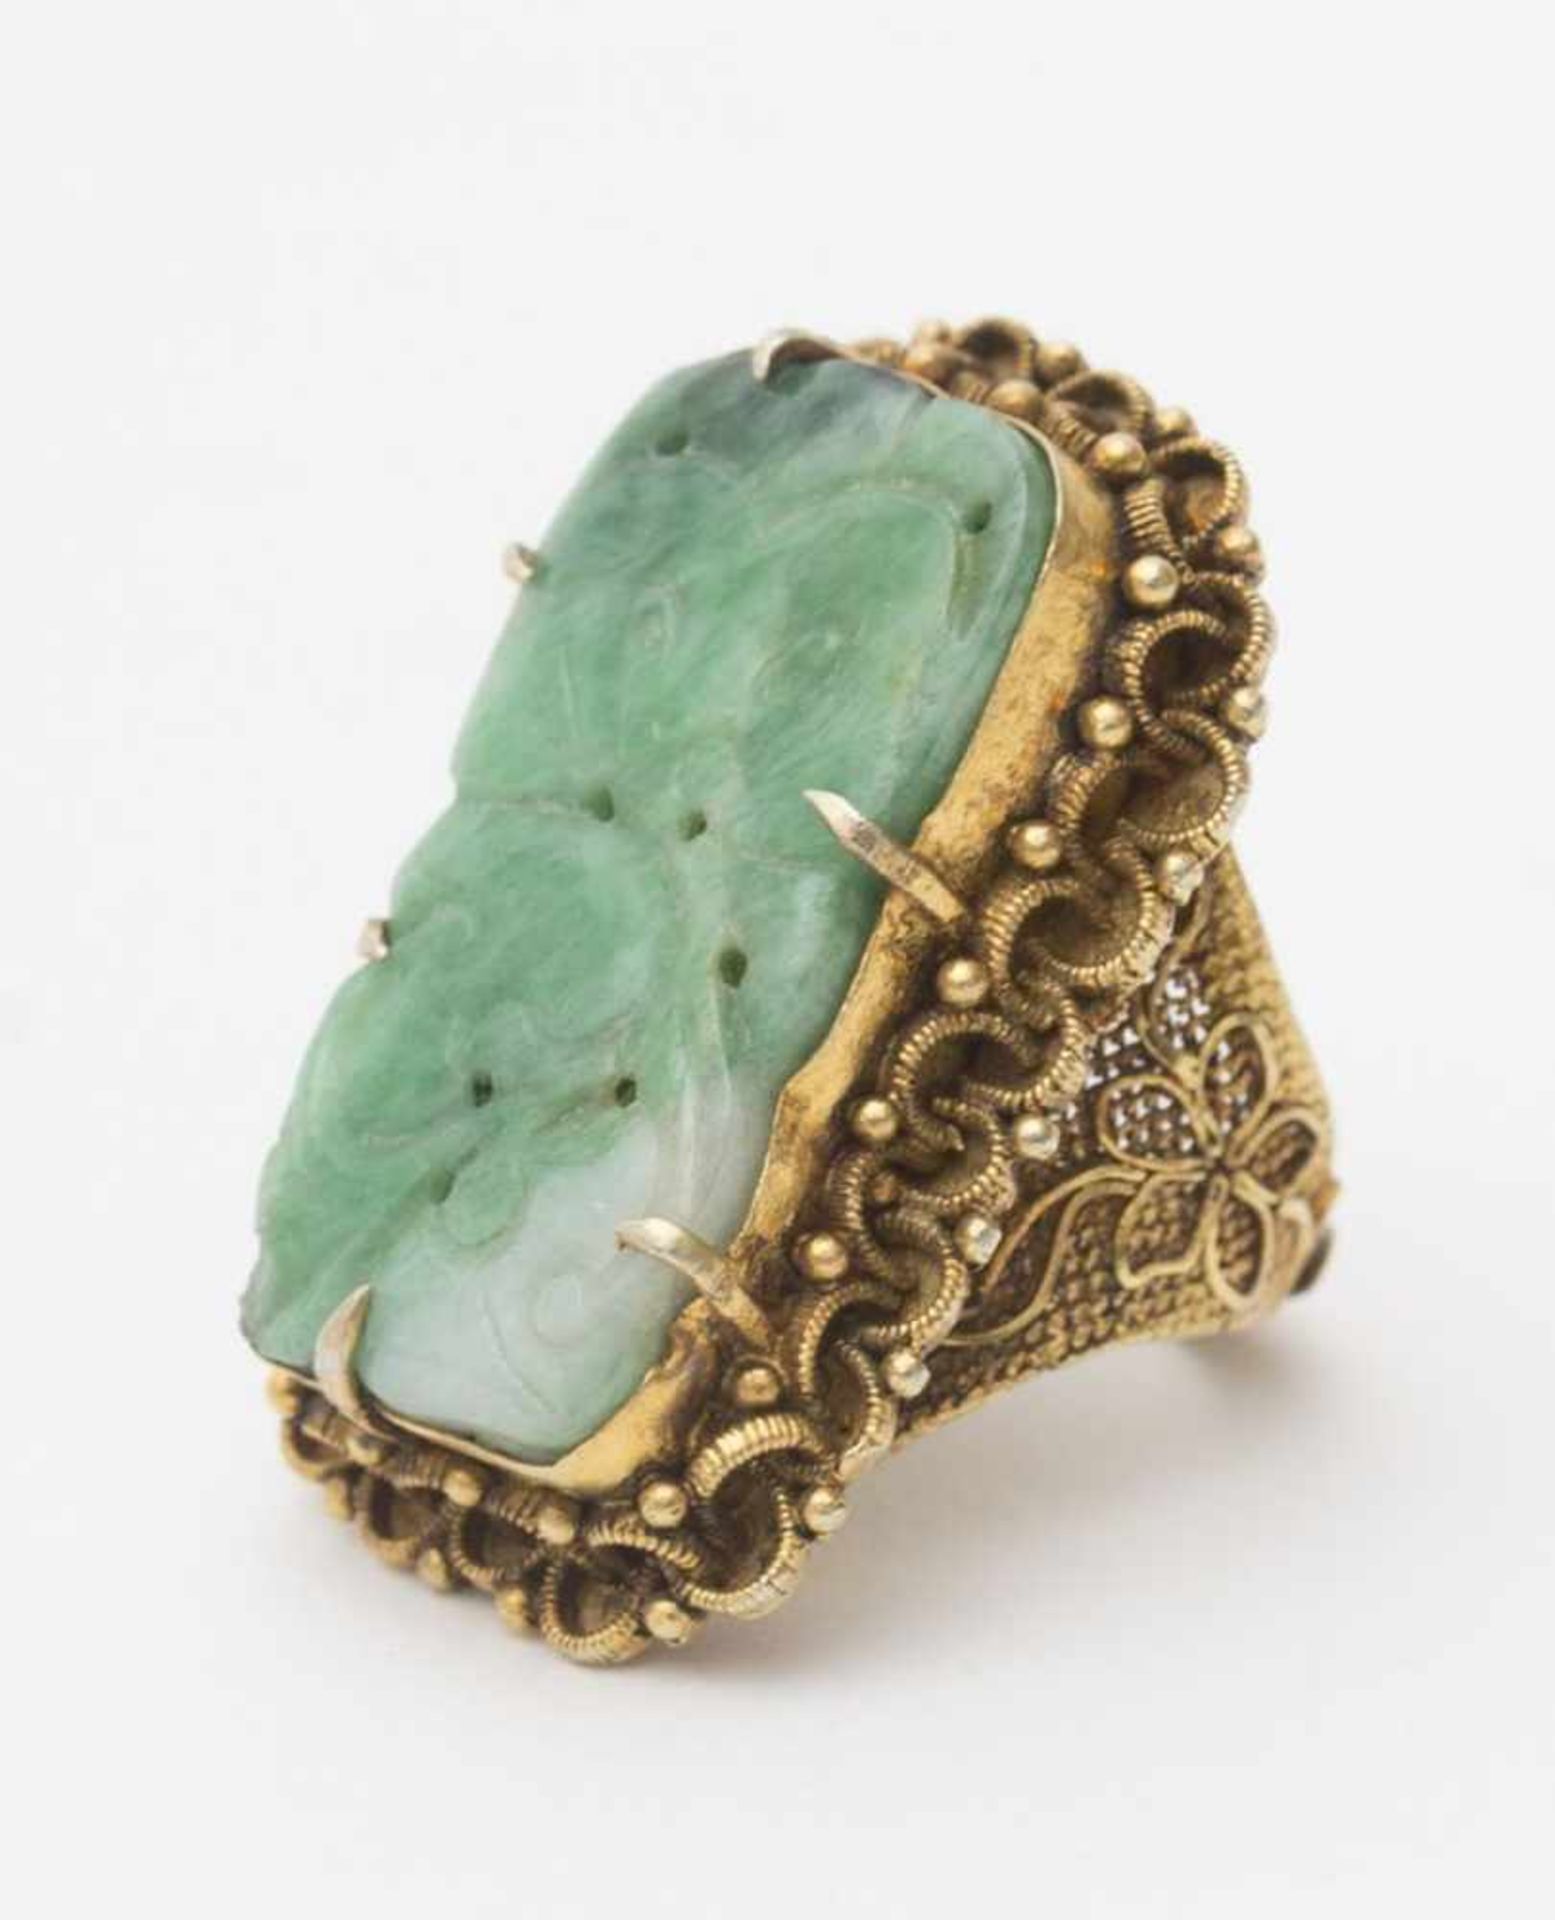 Ring set with jade - China, 20th century Gilded silver filigree, set with a jade plaque in the